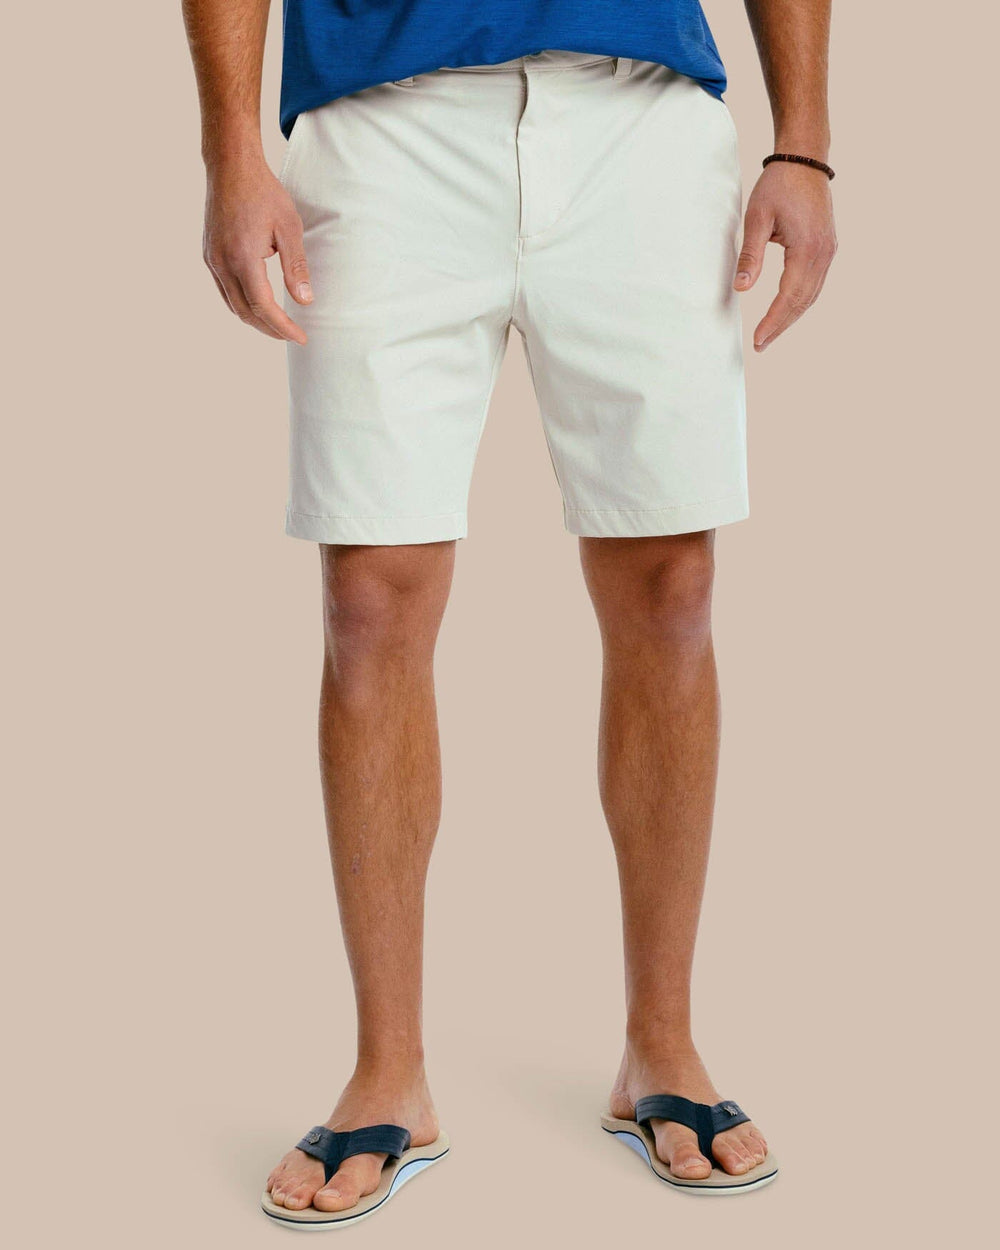 The front of the Men's Gulf 8 Inch Brrr Performance Short by Southern Tide - Stone